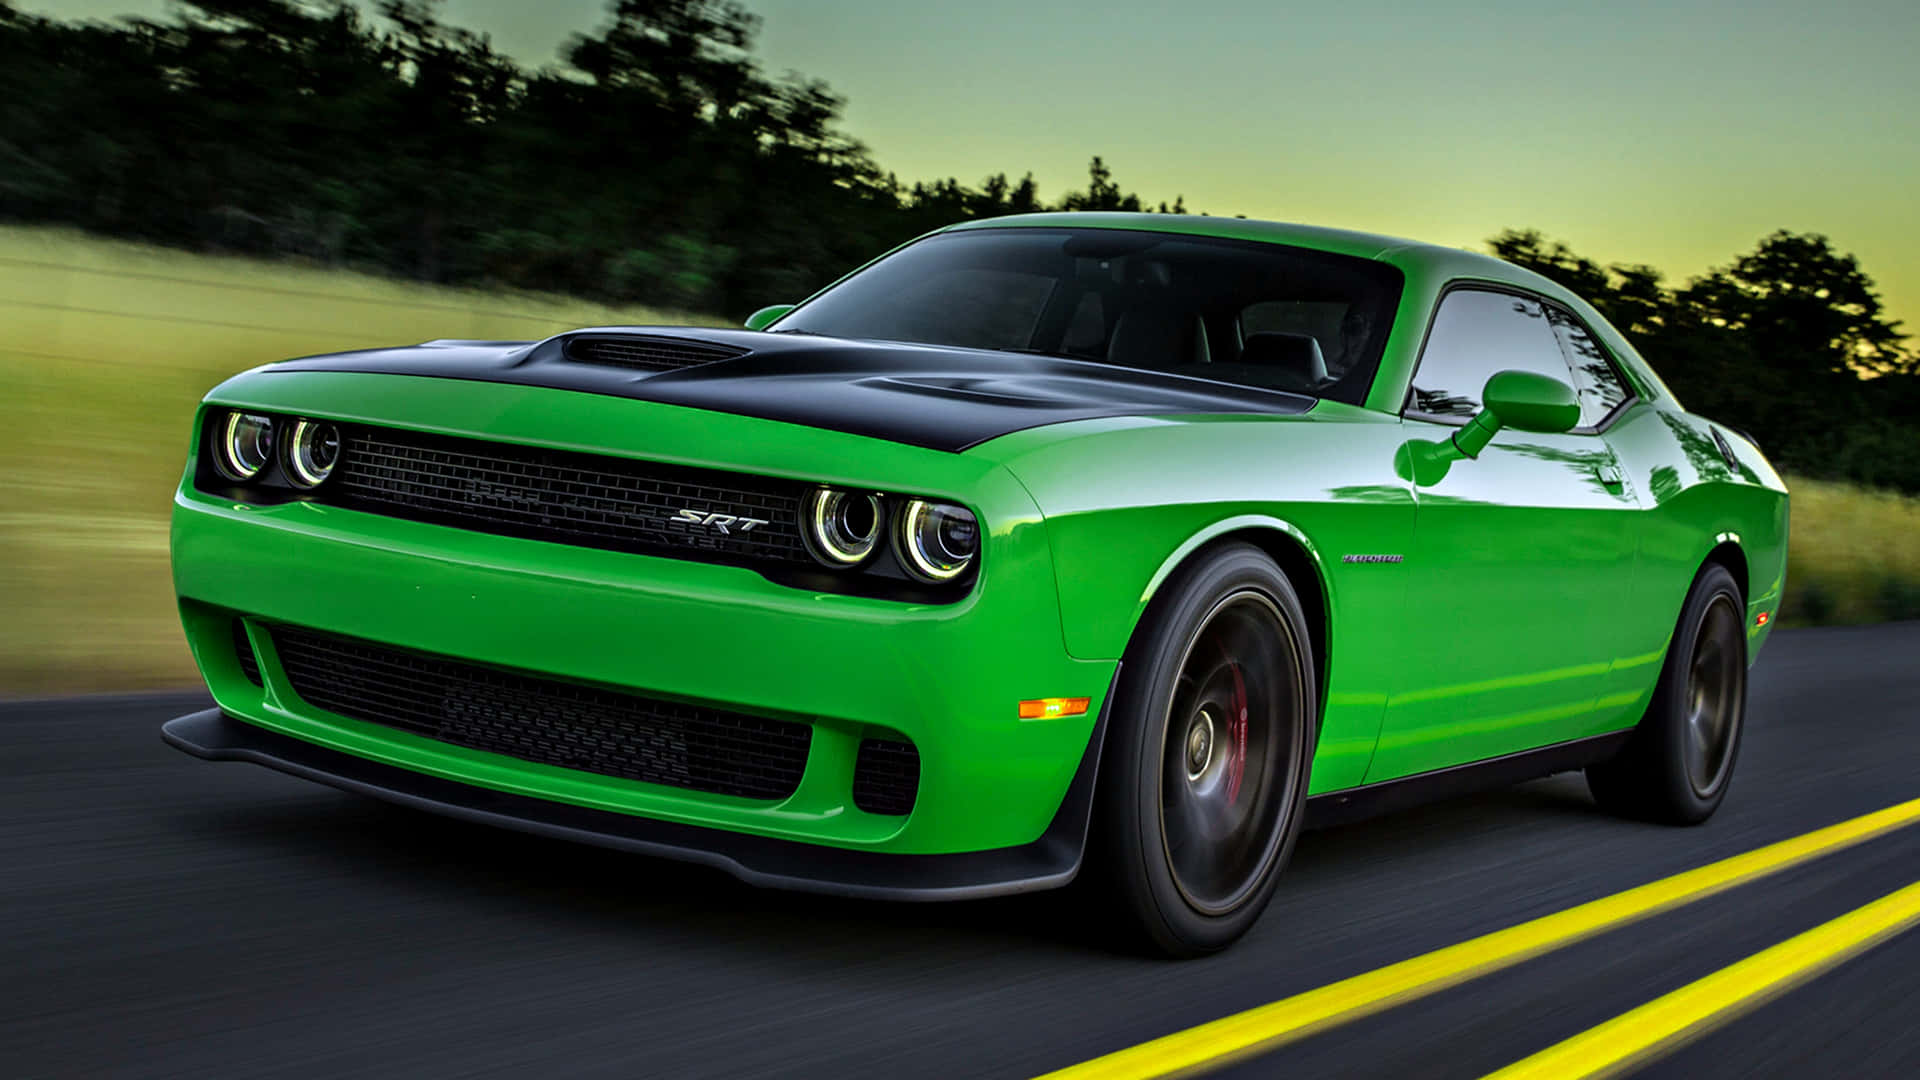 The Green Dodge Challenger Is Driving Down The Road Background